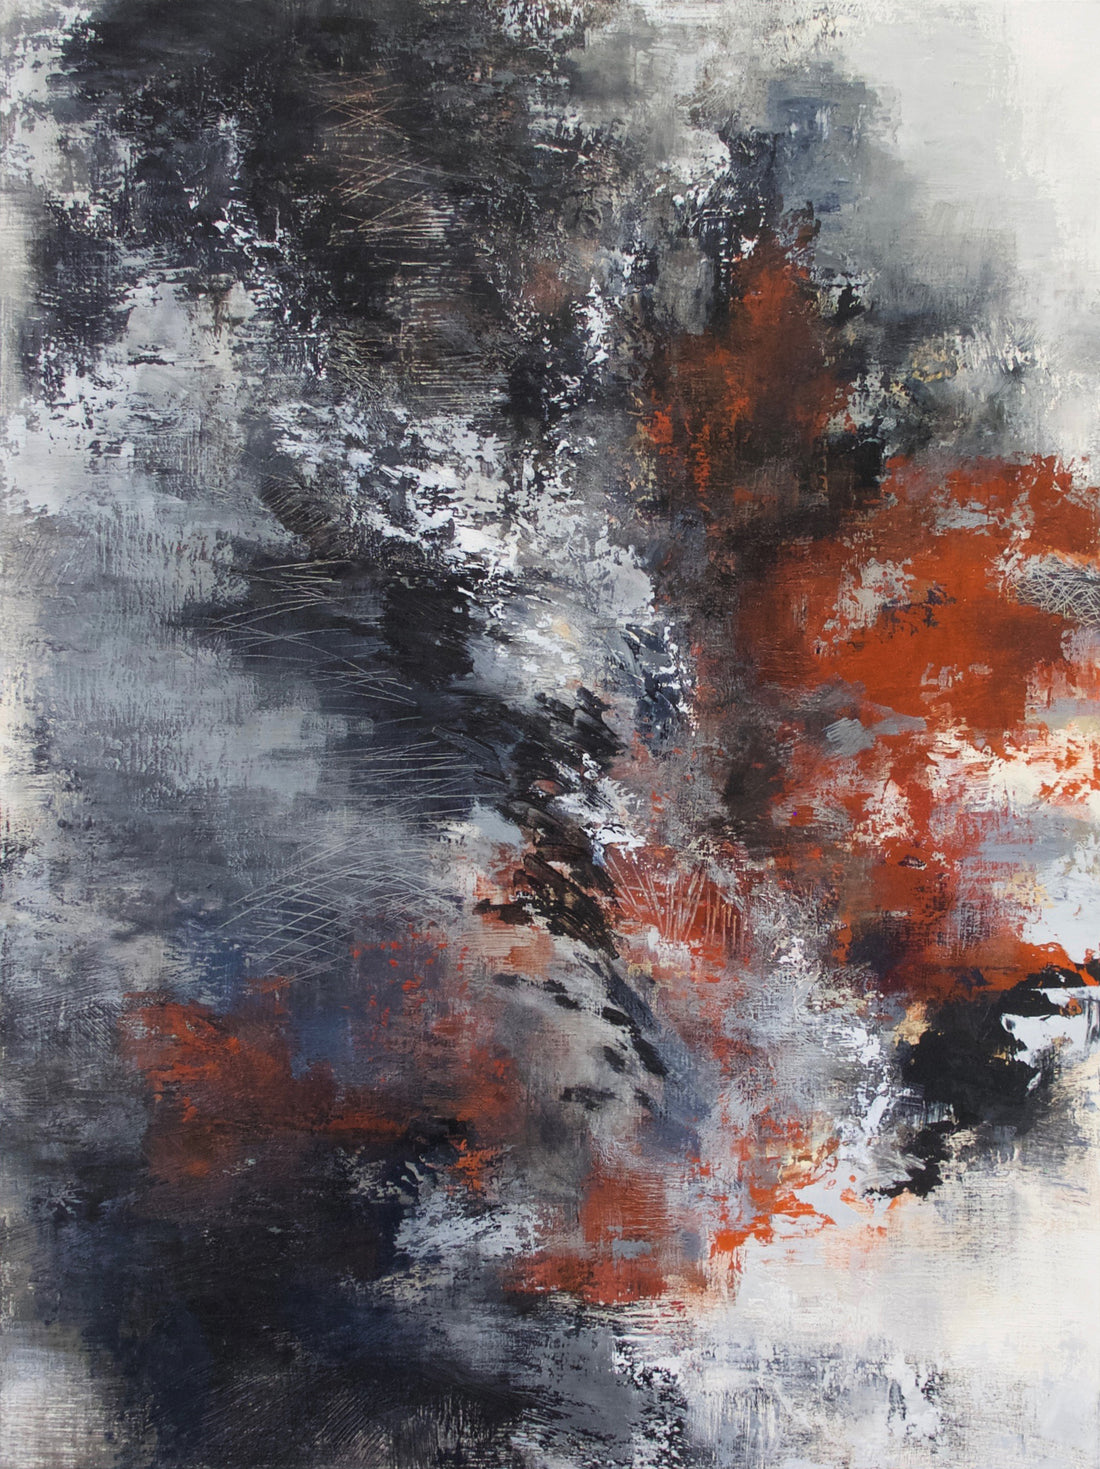 Abstract with black, grey and dark orange